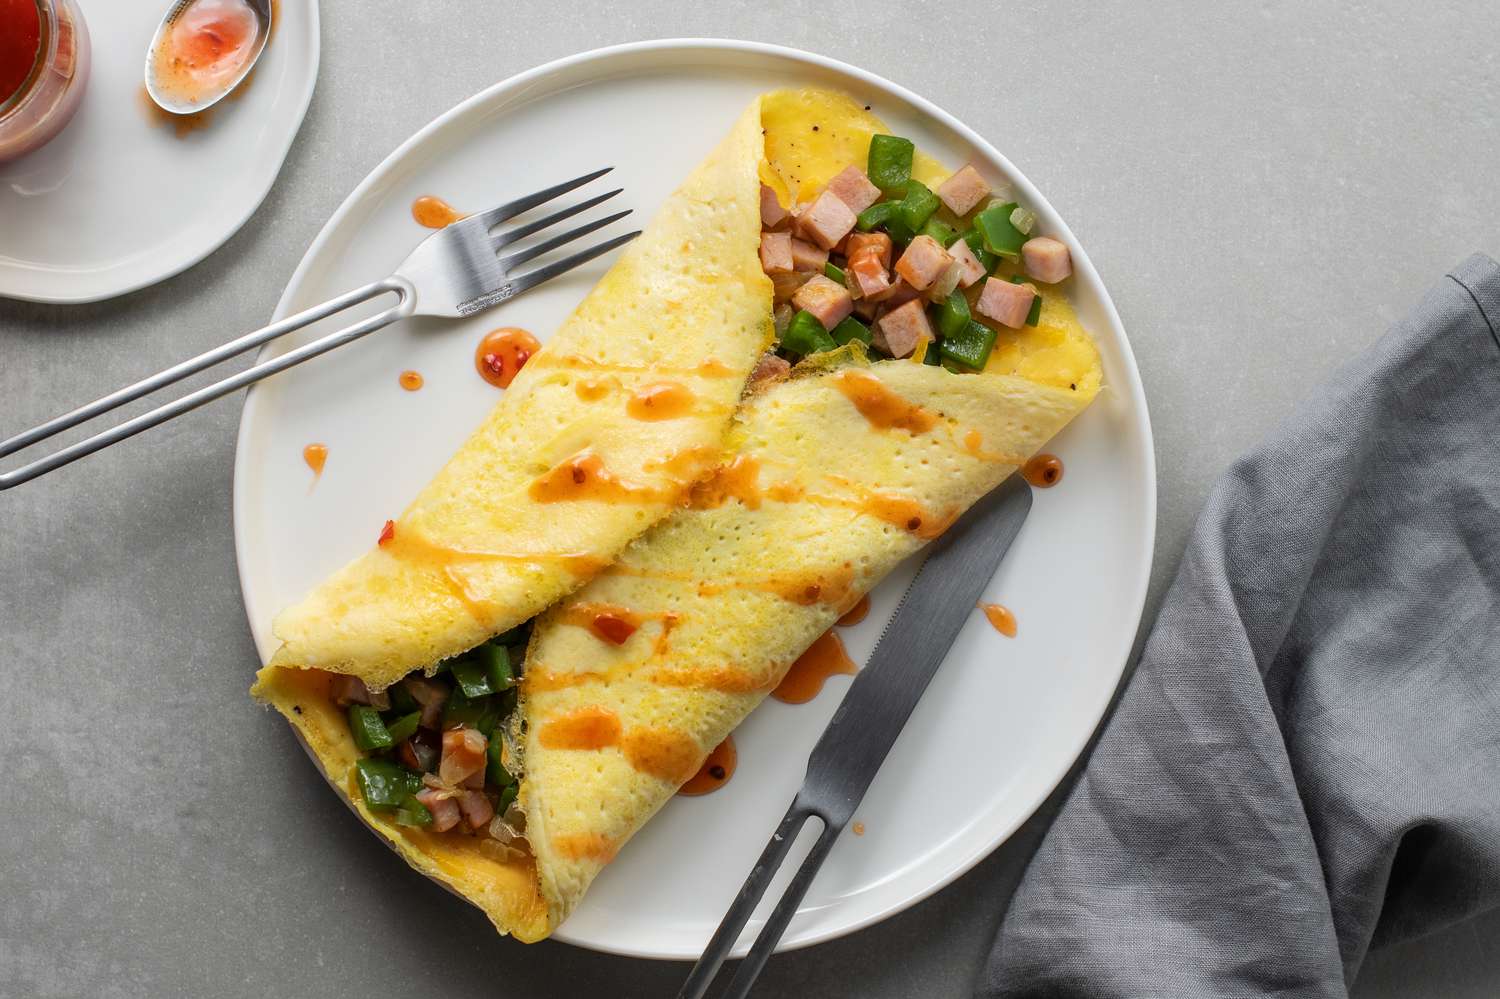 Denver omelet fillet with diced ham and green bell pepper on a plate